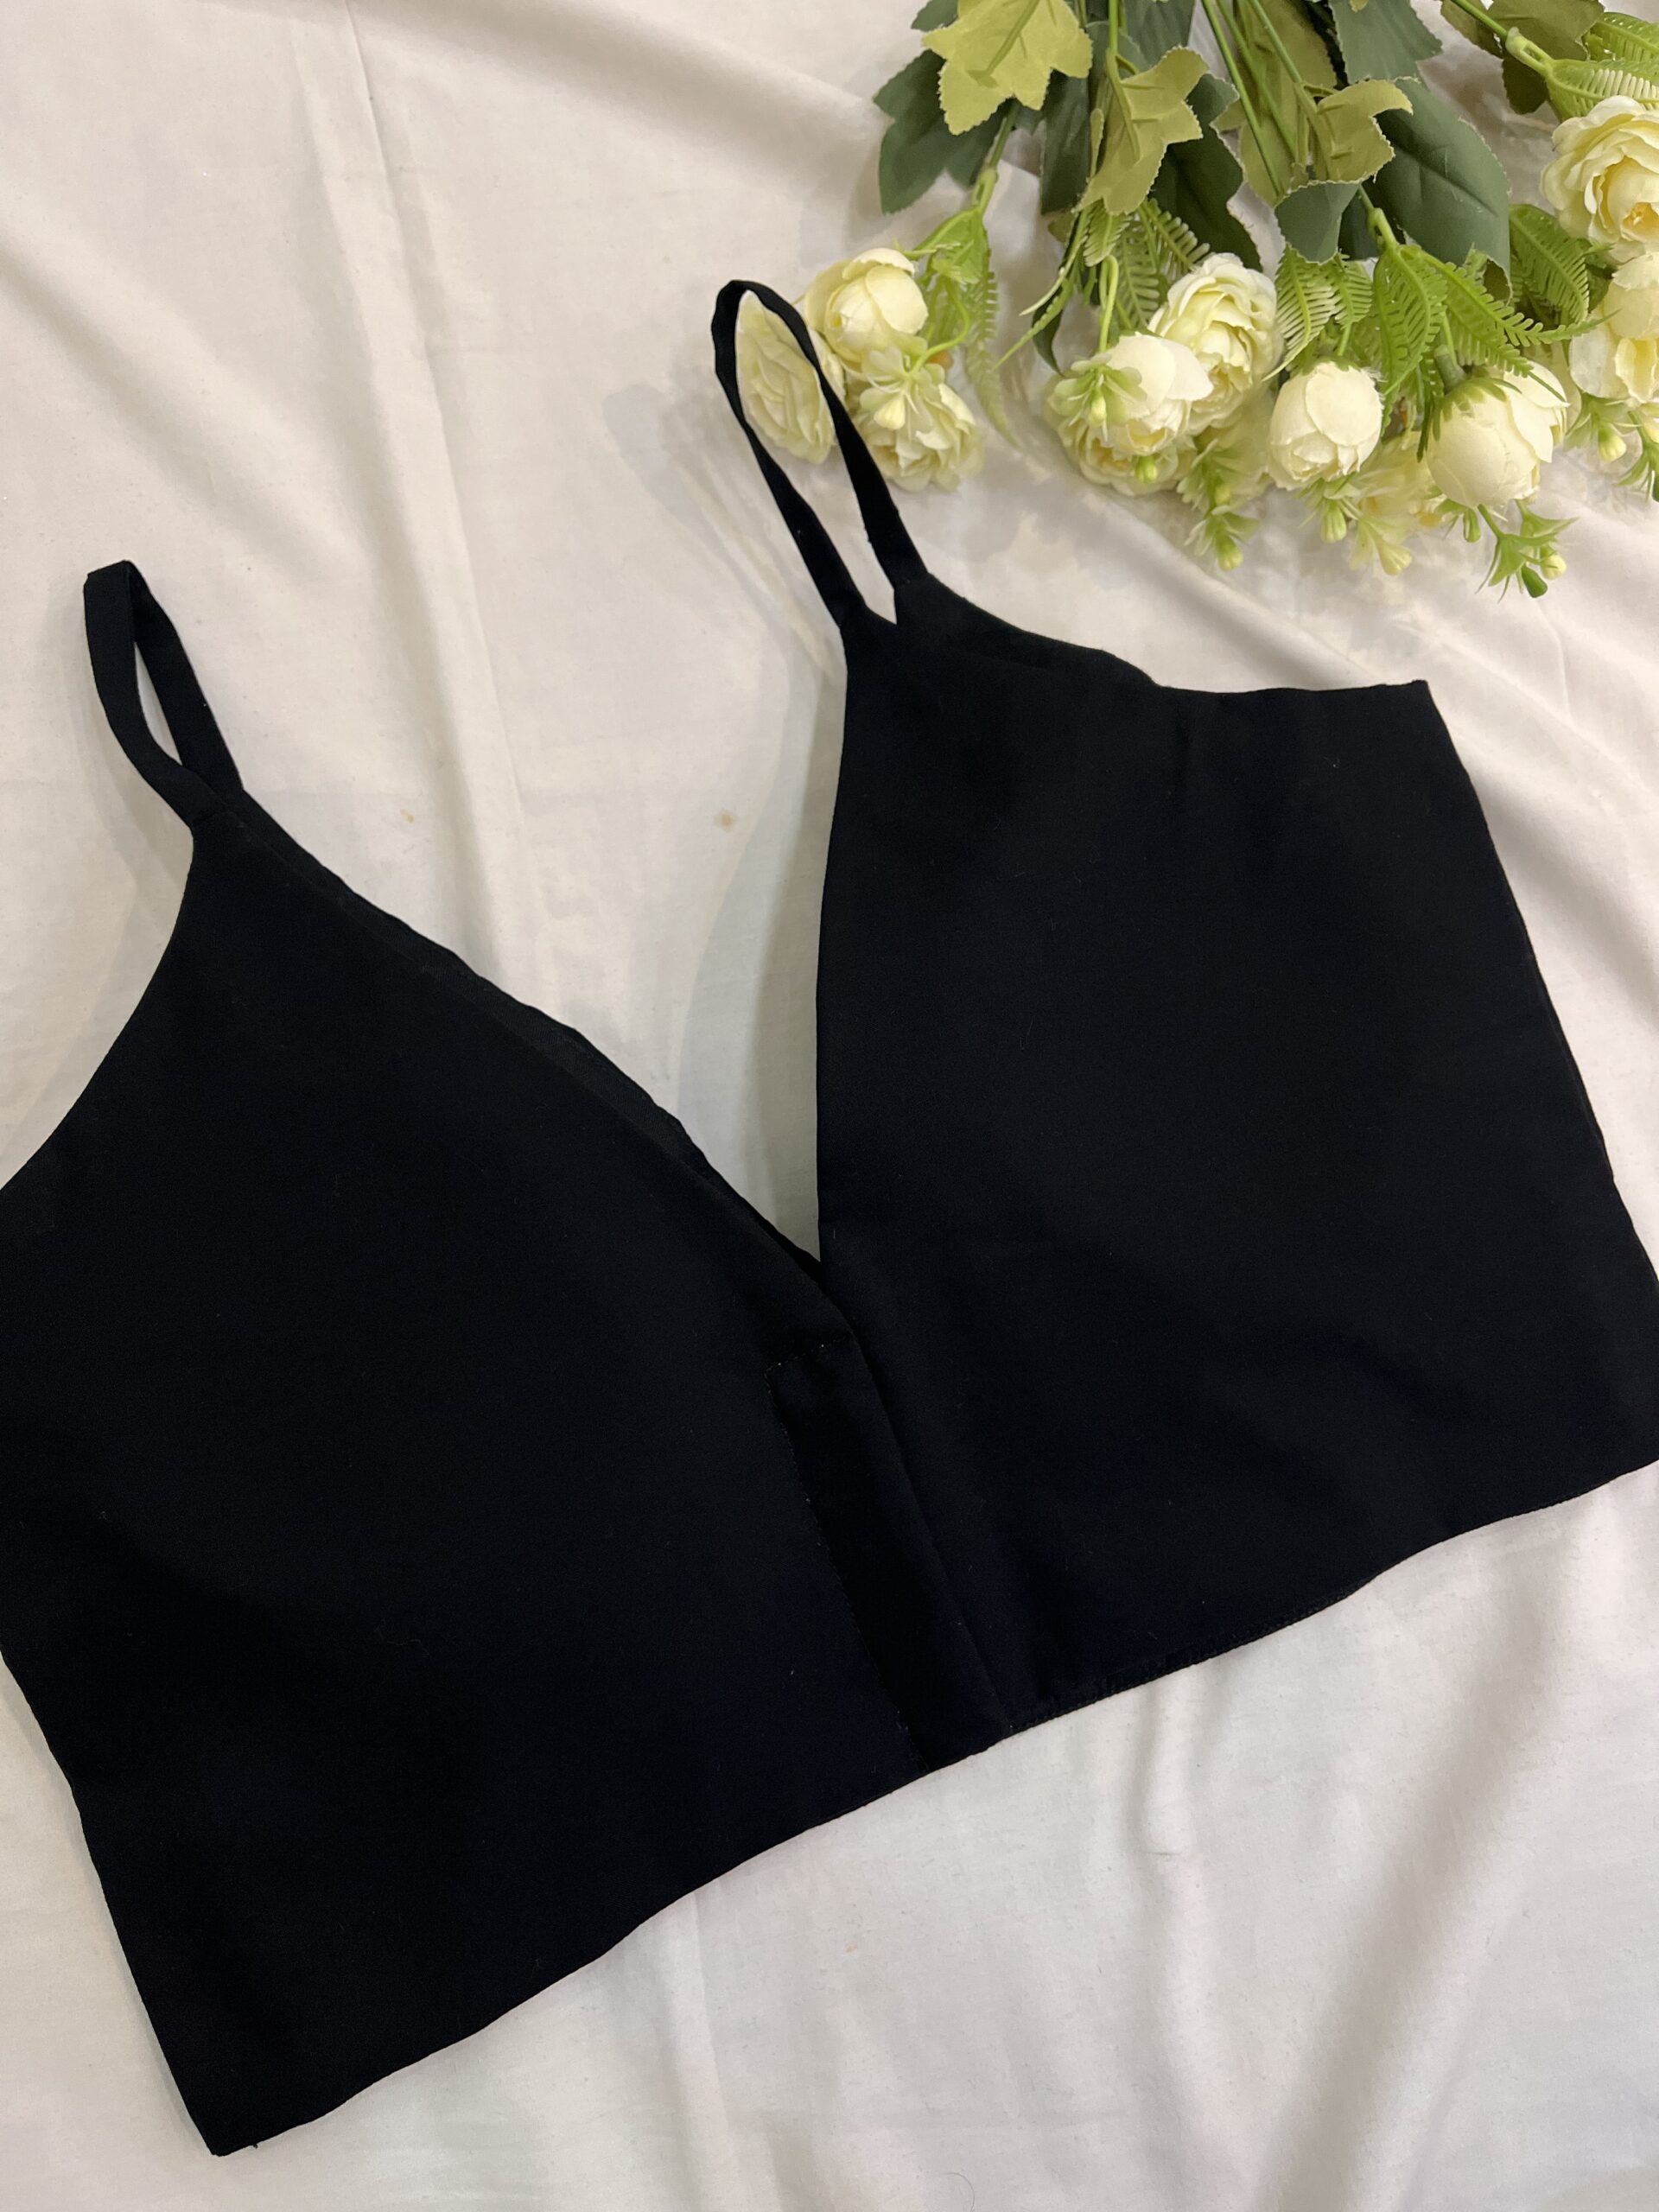 MAGRE Women Black Satin Bralette Crop Top Price in India, Full  Specifications & Offers